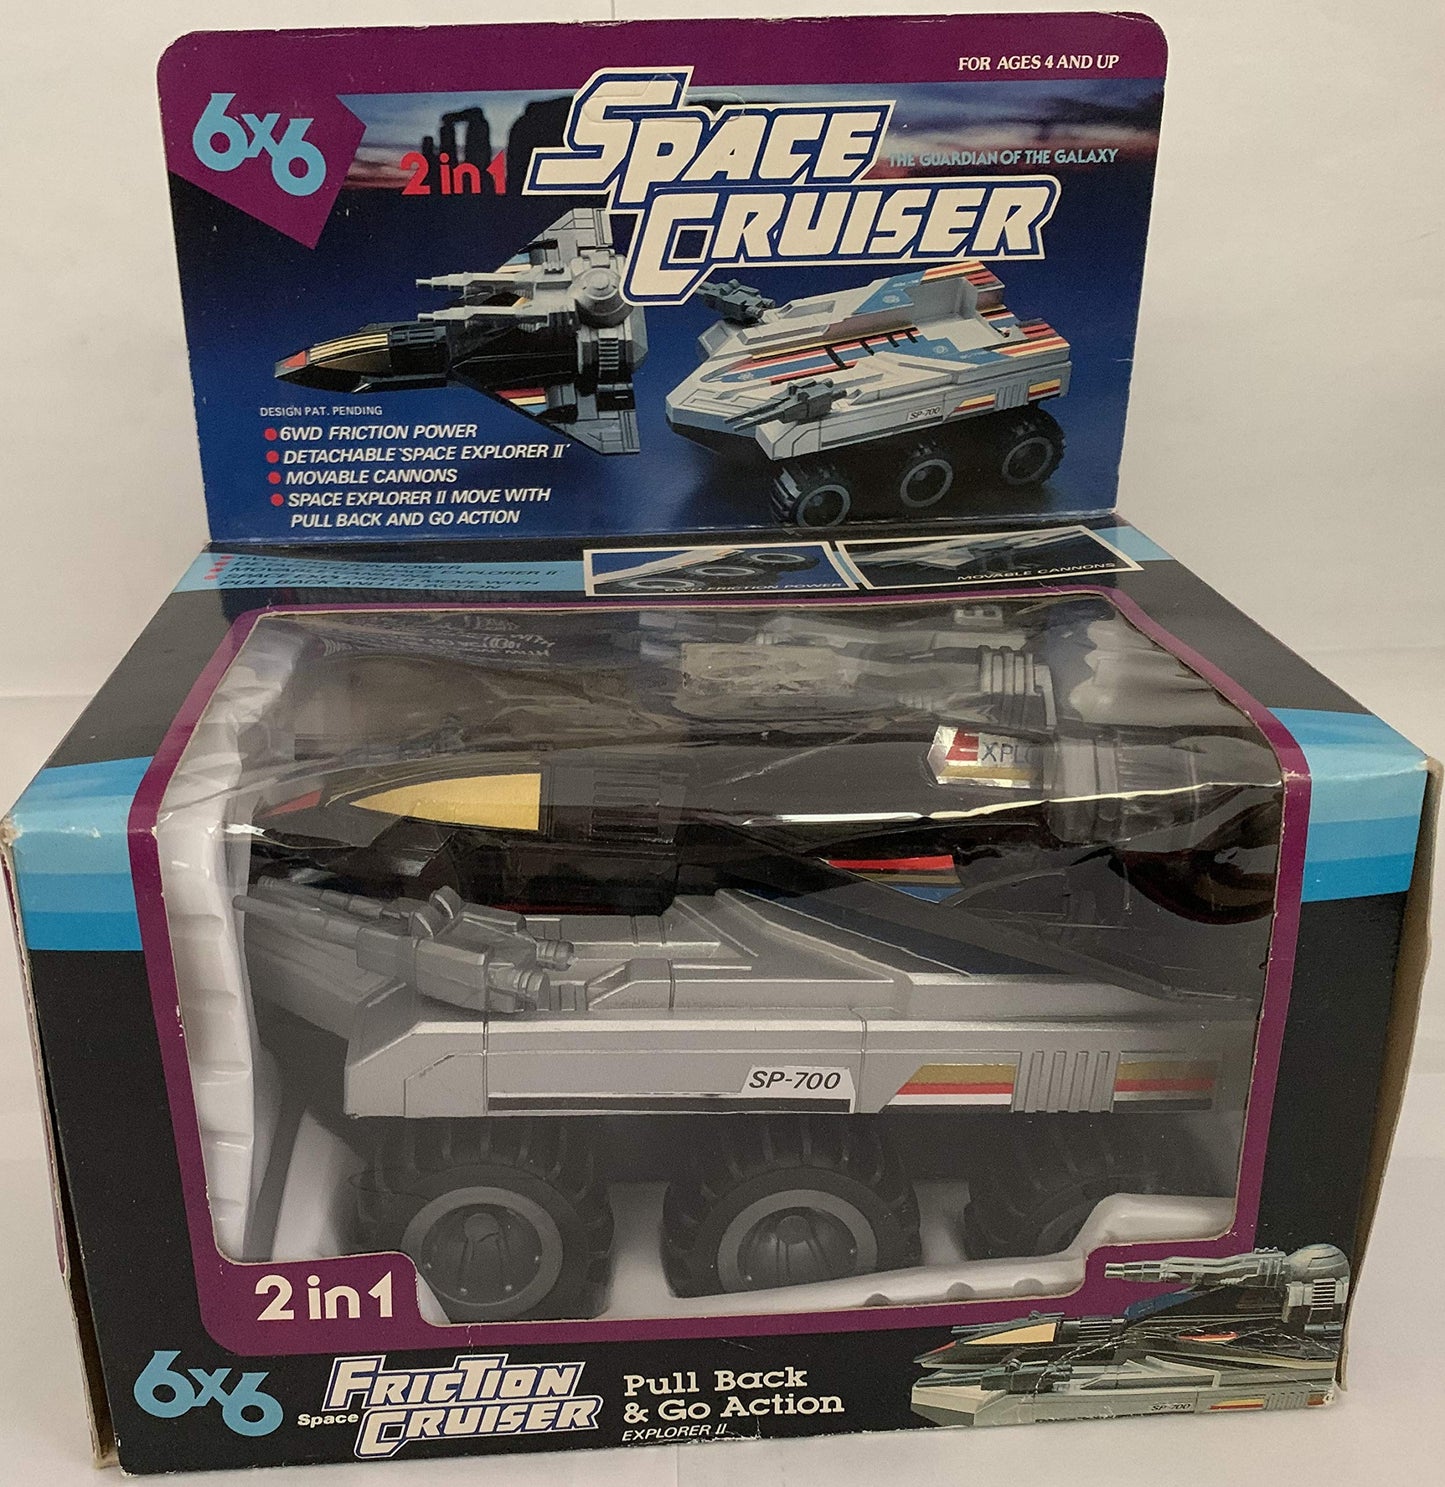 Vintage 1980s 2 In 1 Friction Drive Silver Space Cruiser Explorer II SP 700 - The Guardian Of The Galaxy - Pull Back & Go Action - - Shop Stock Room Find